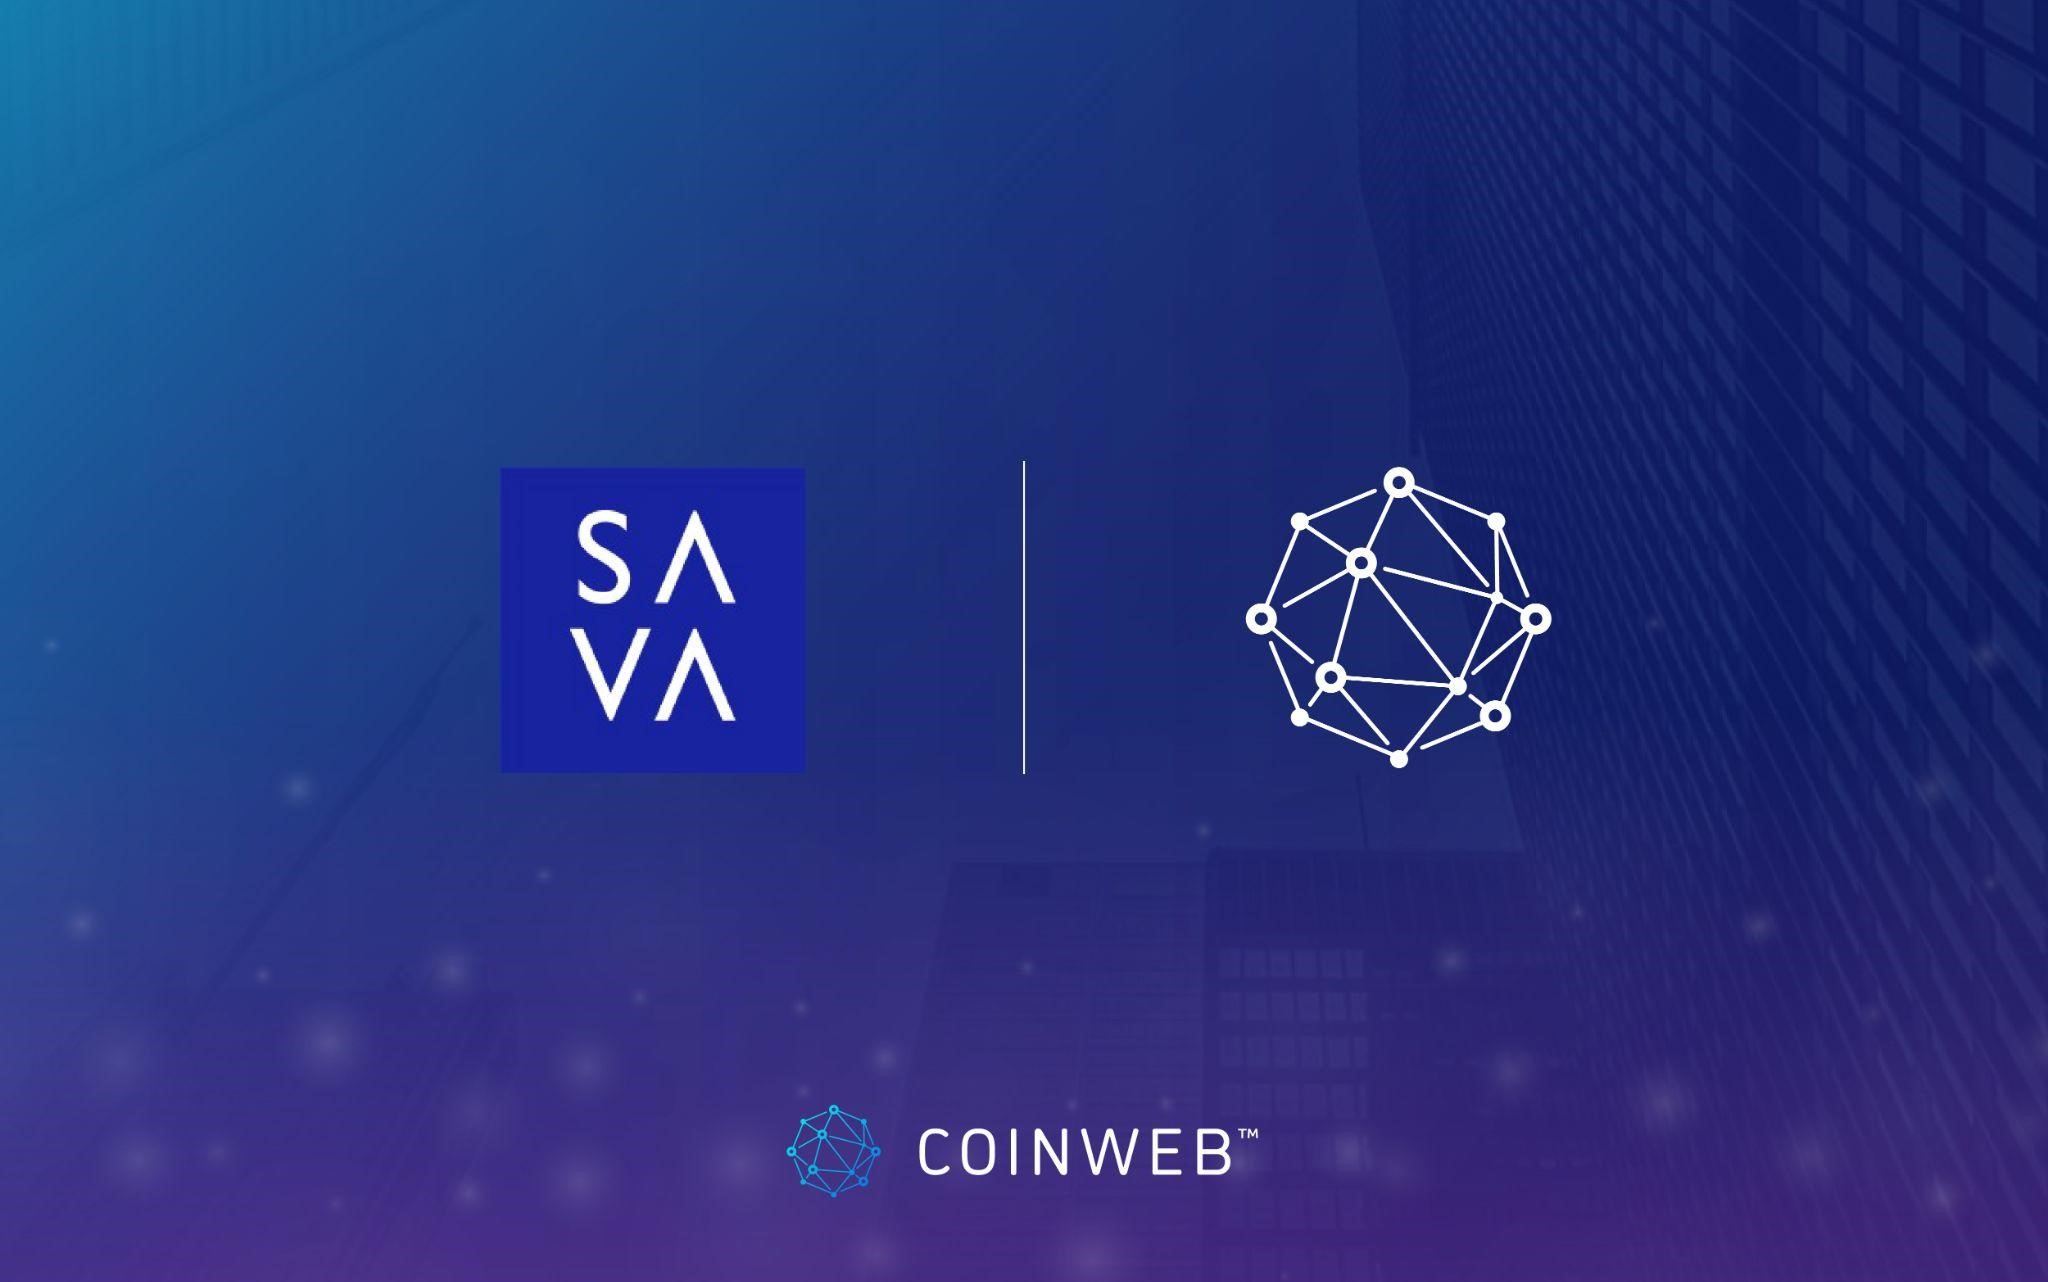 Coinweb has closed a USD2 Million fundraising round from SAVA Investment Management, buying back $CWEB from the legacy team and founders